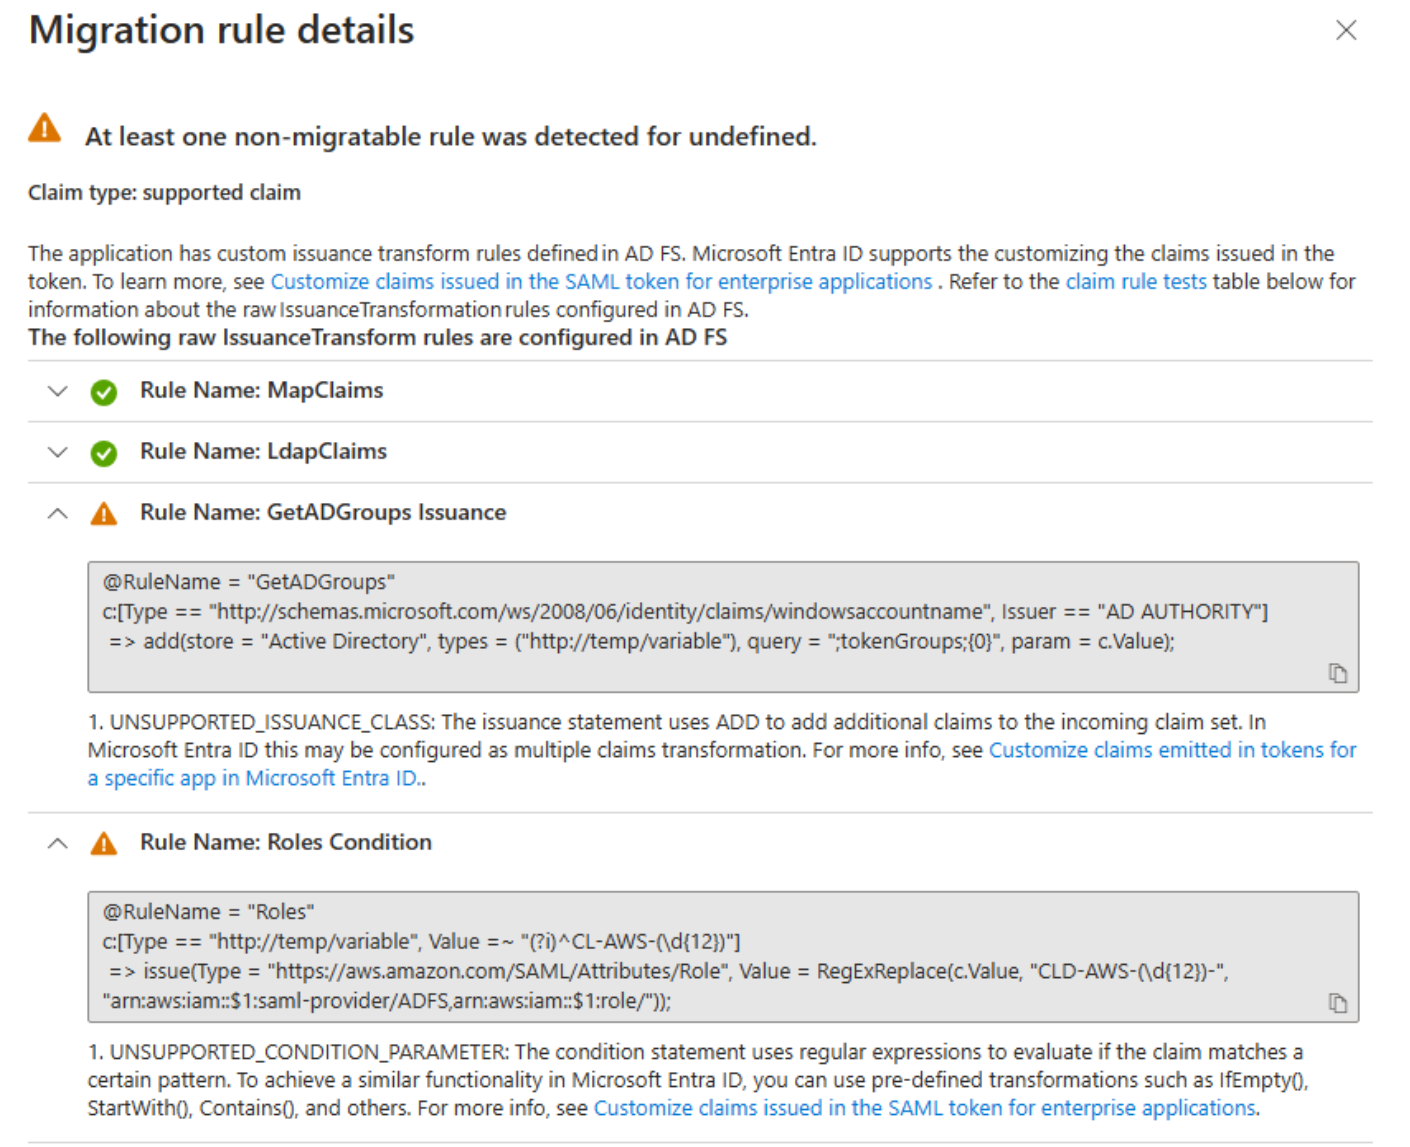 Screenshot of the AD FS application migration rules details pane.